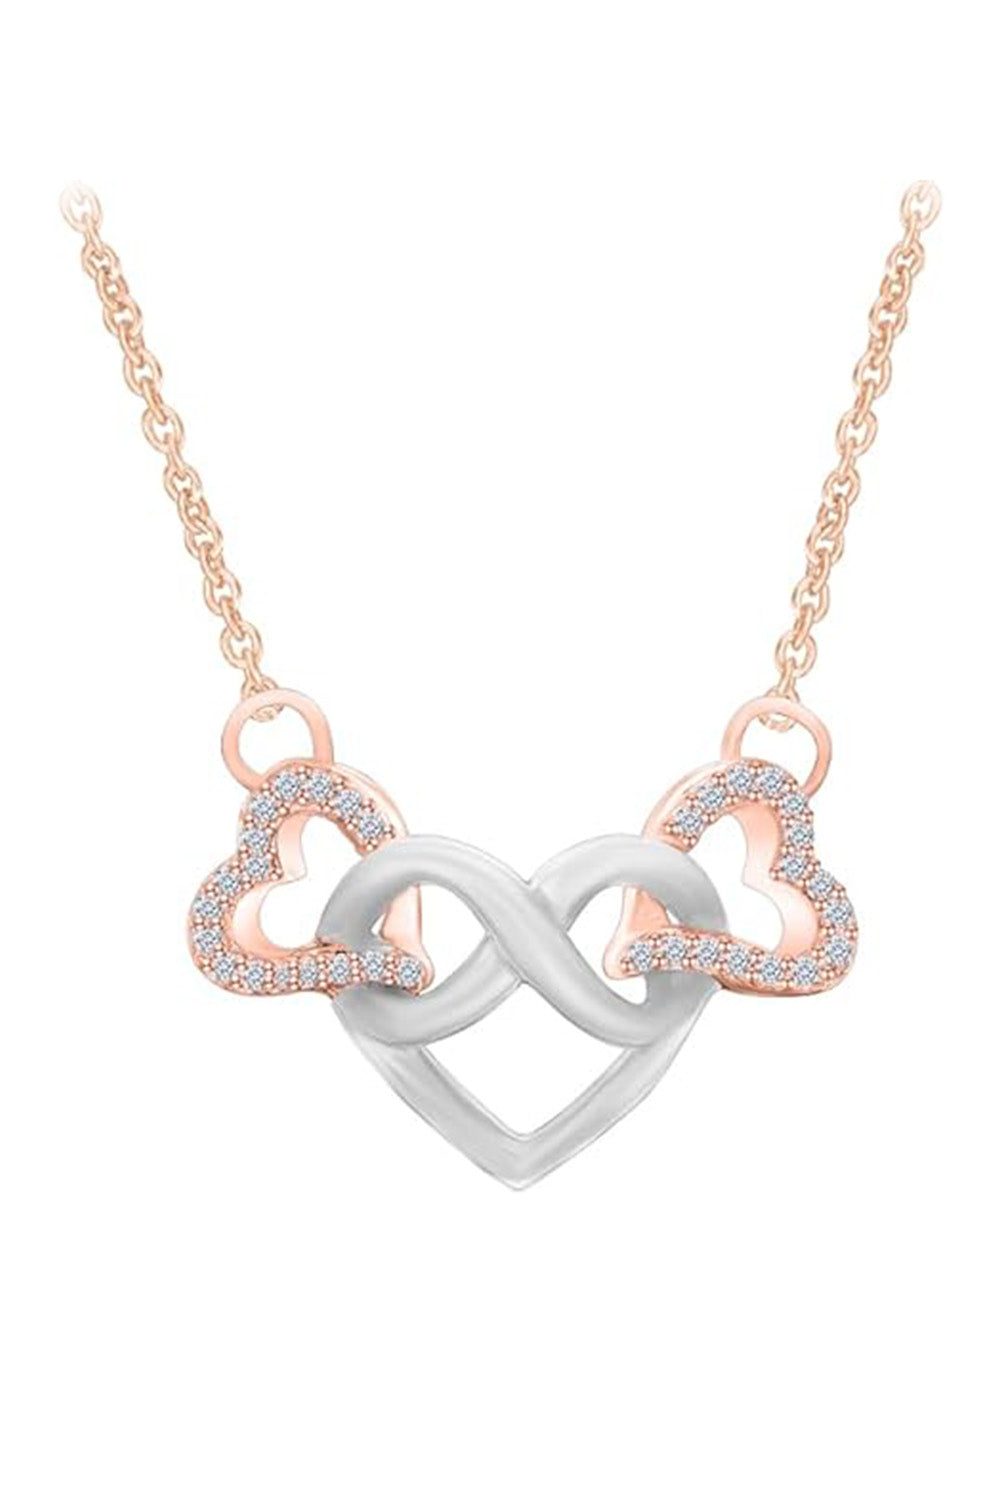 Rose Gold Color Infinity Love Heart Interlocking Pendant Necklace